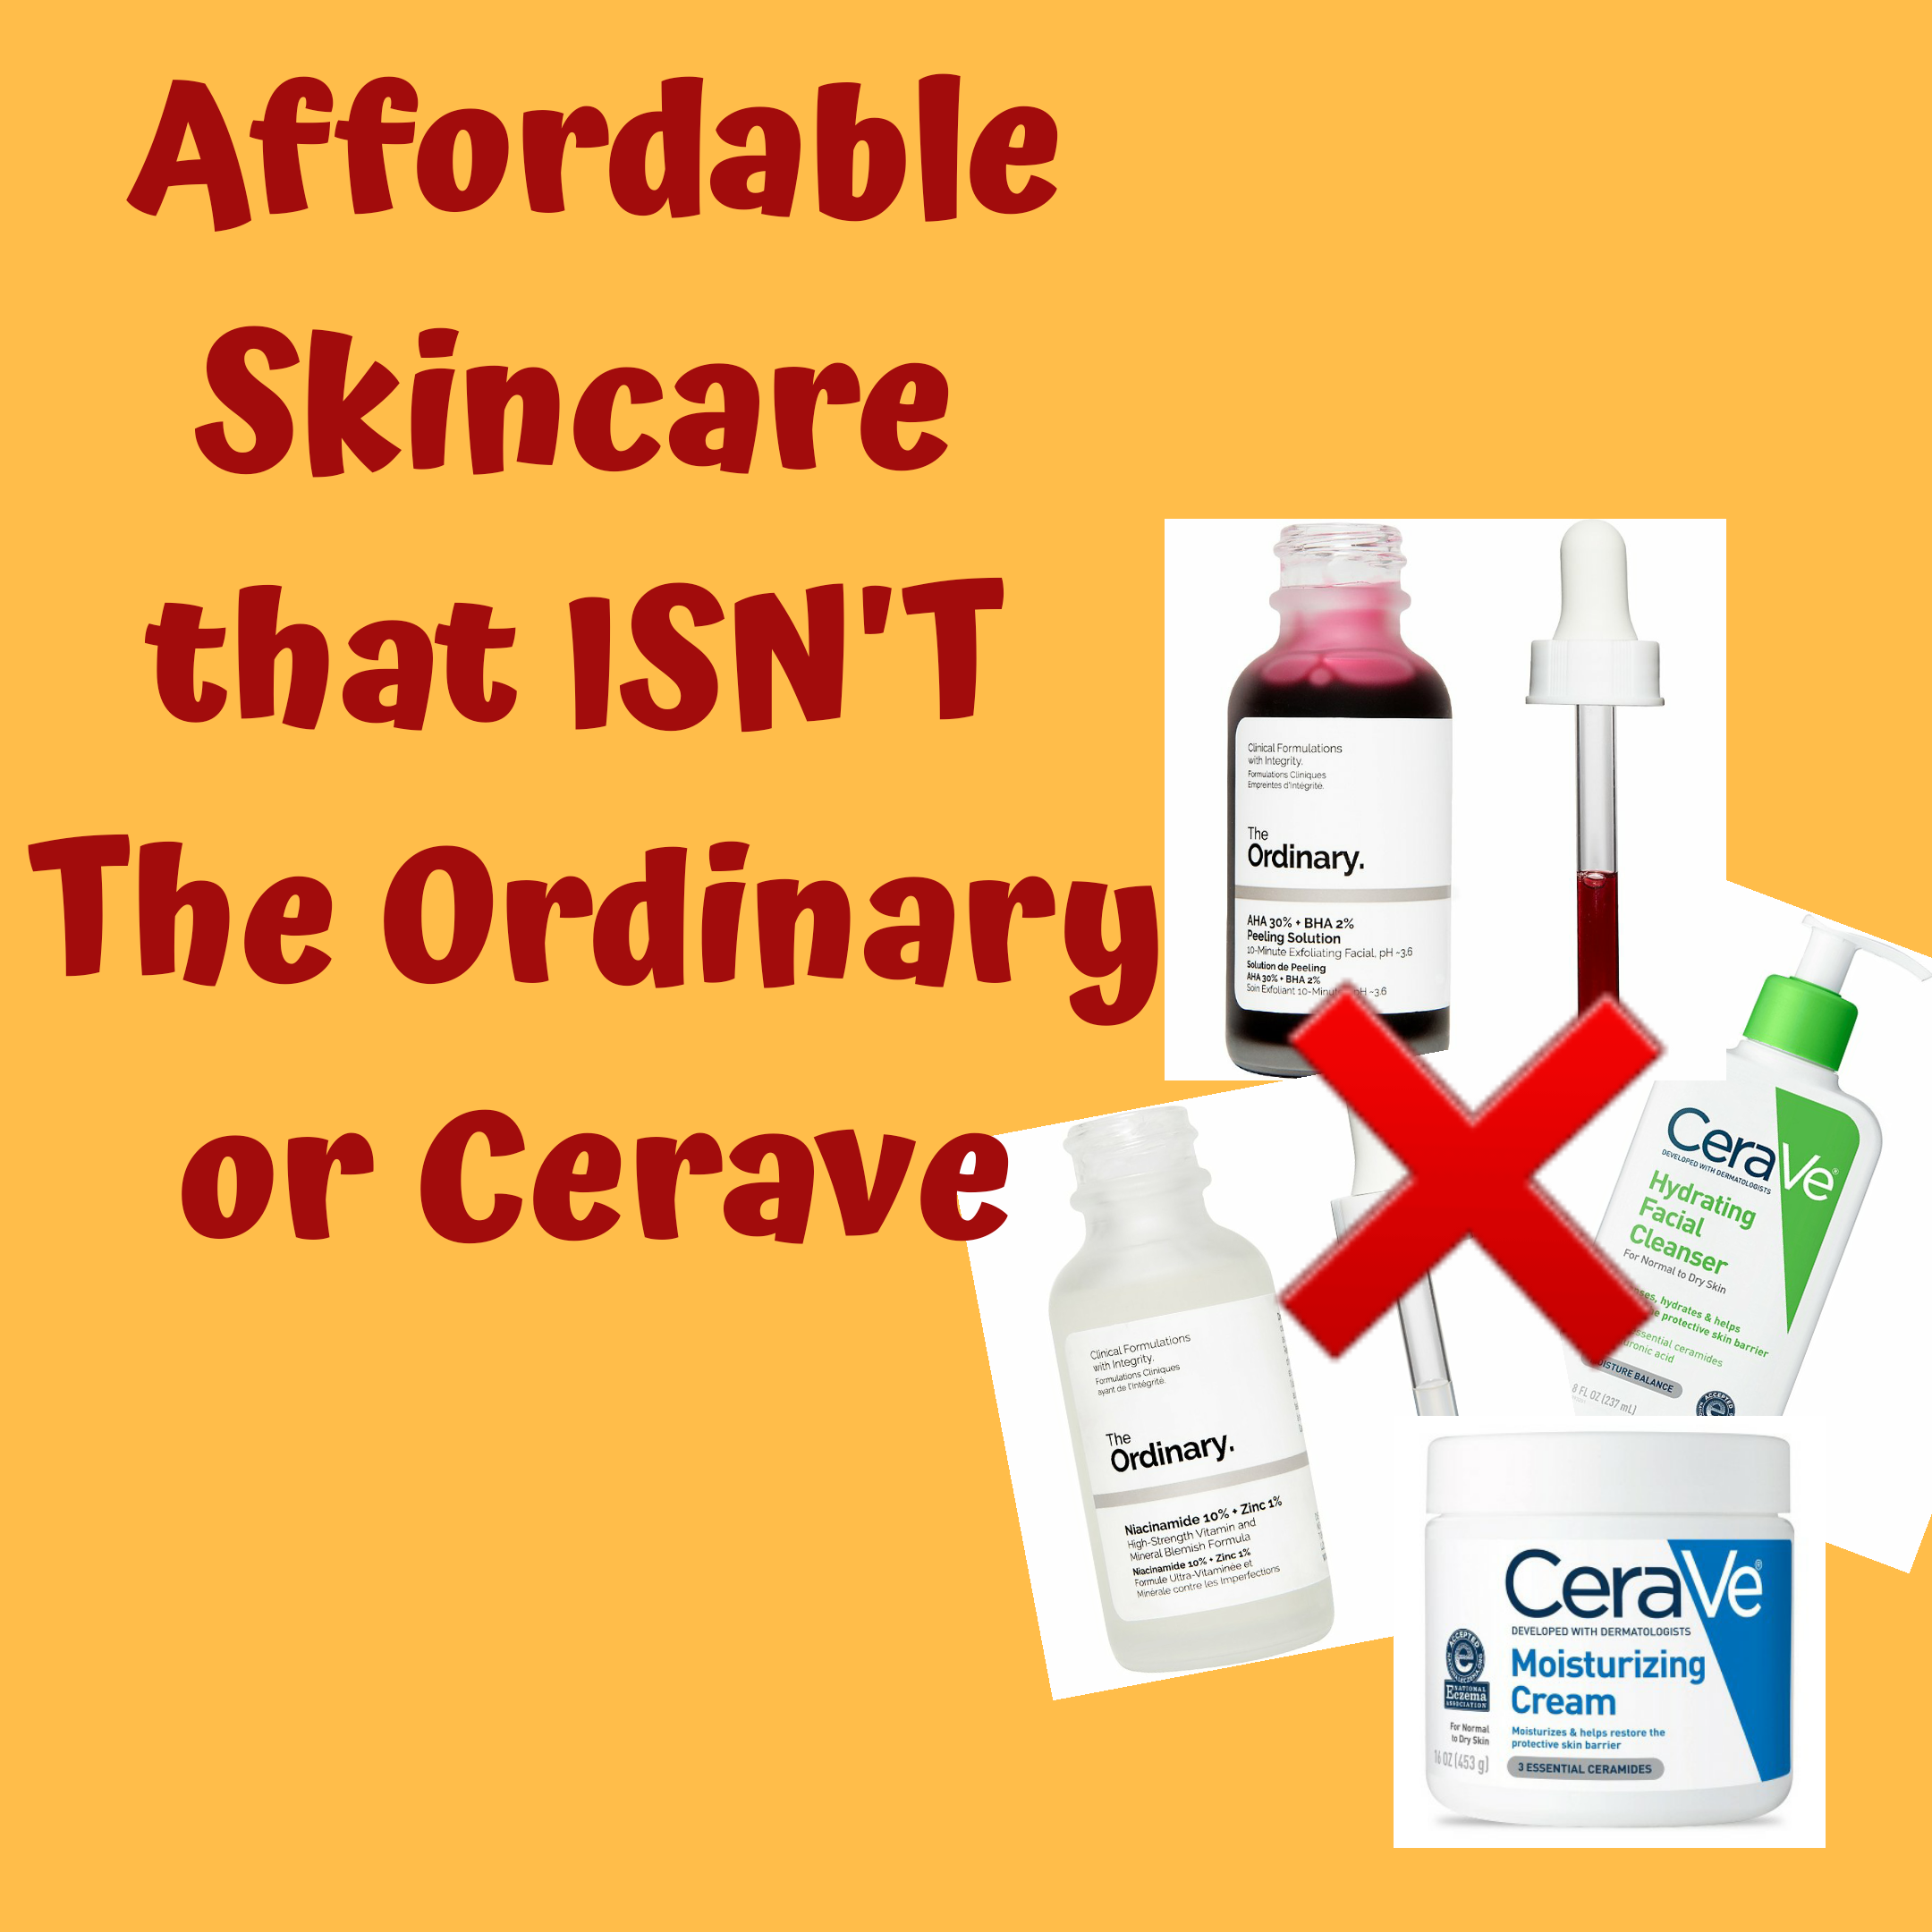 Affordable Skincare that isn’t CeraVe or The Ordinary